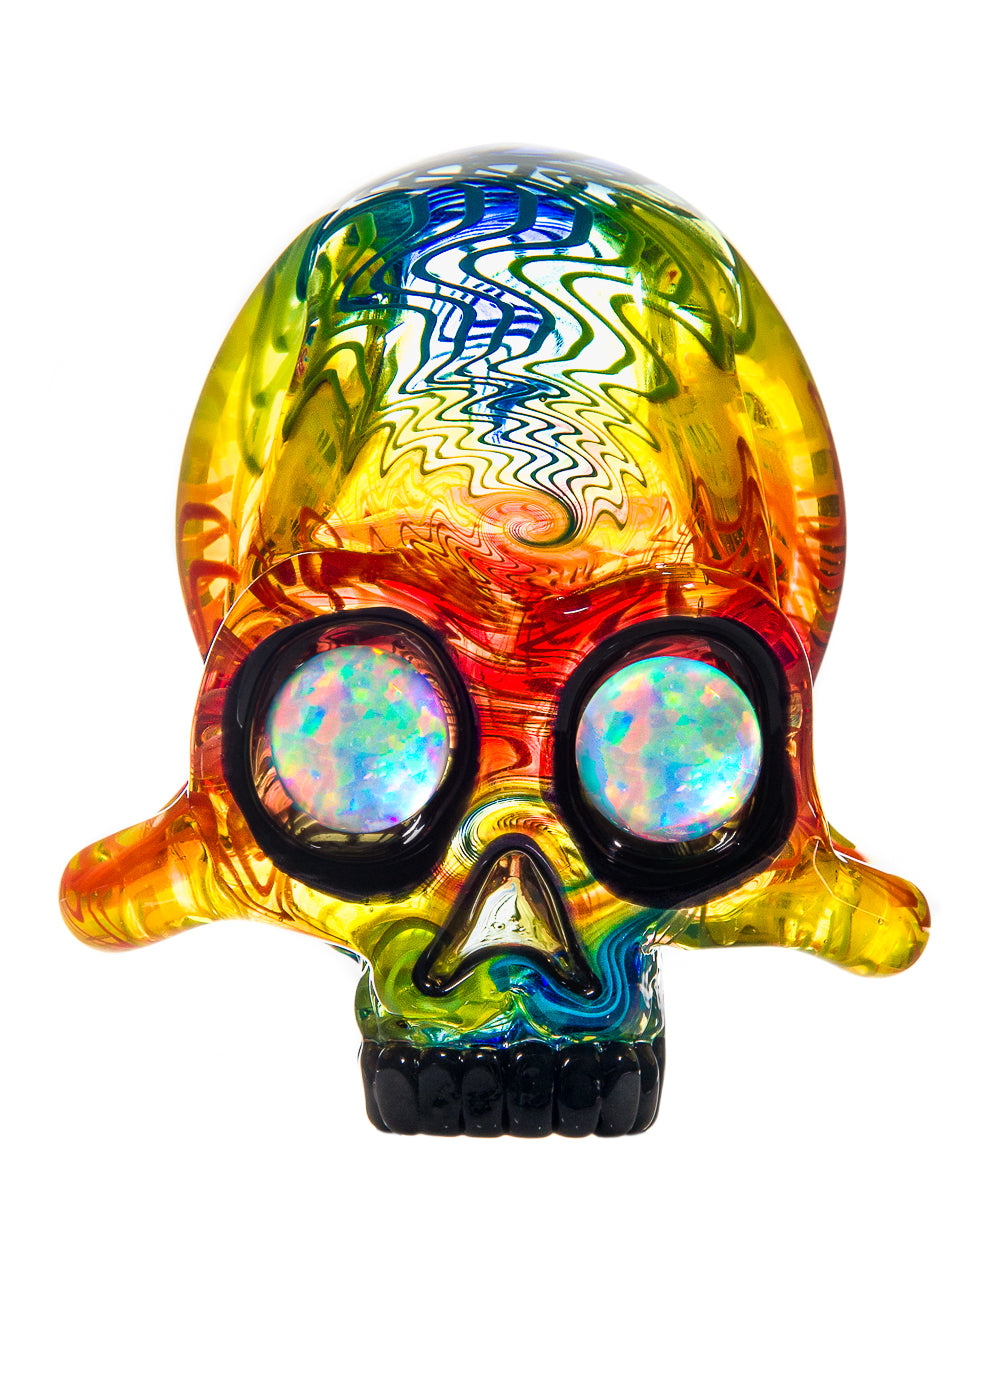 Illuzion Glass Galleries 2017 Annual 420 Party Collaboration Skull Pendant #2 by AKM and Cowboy